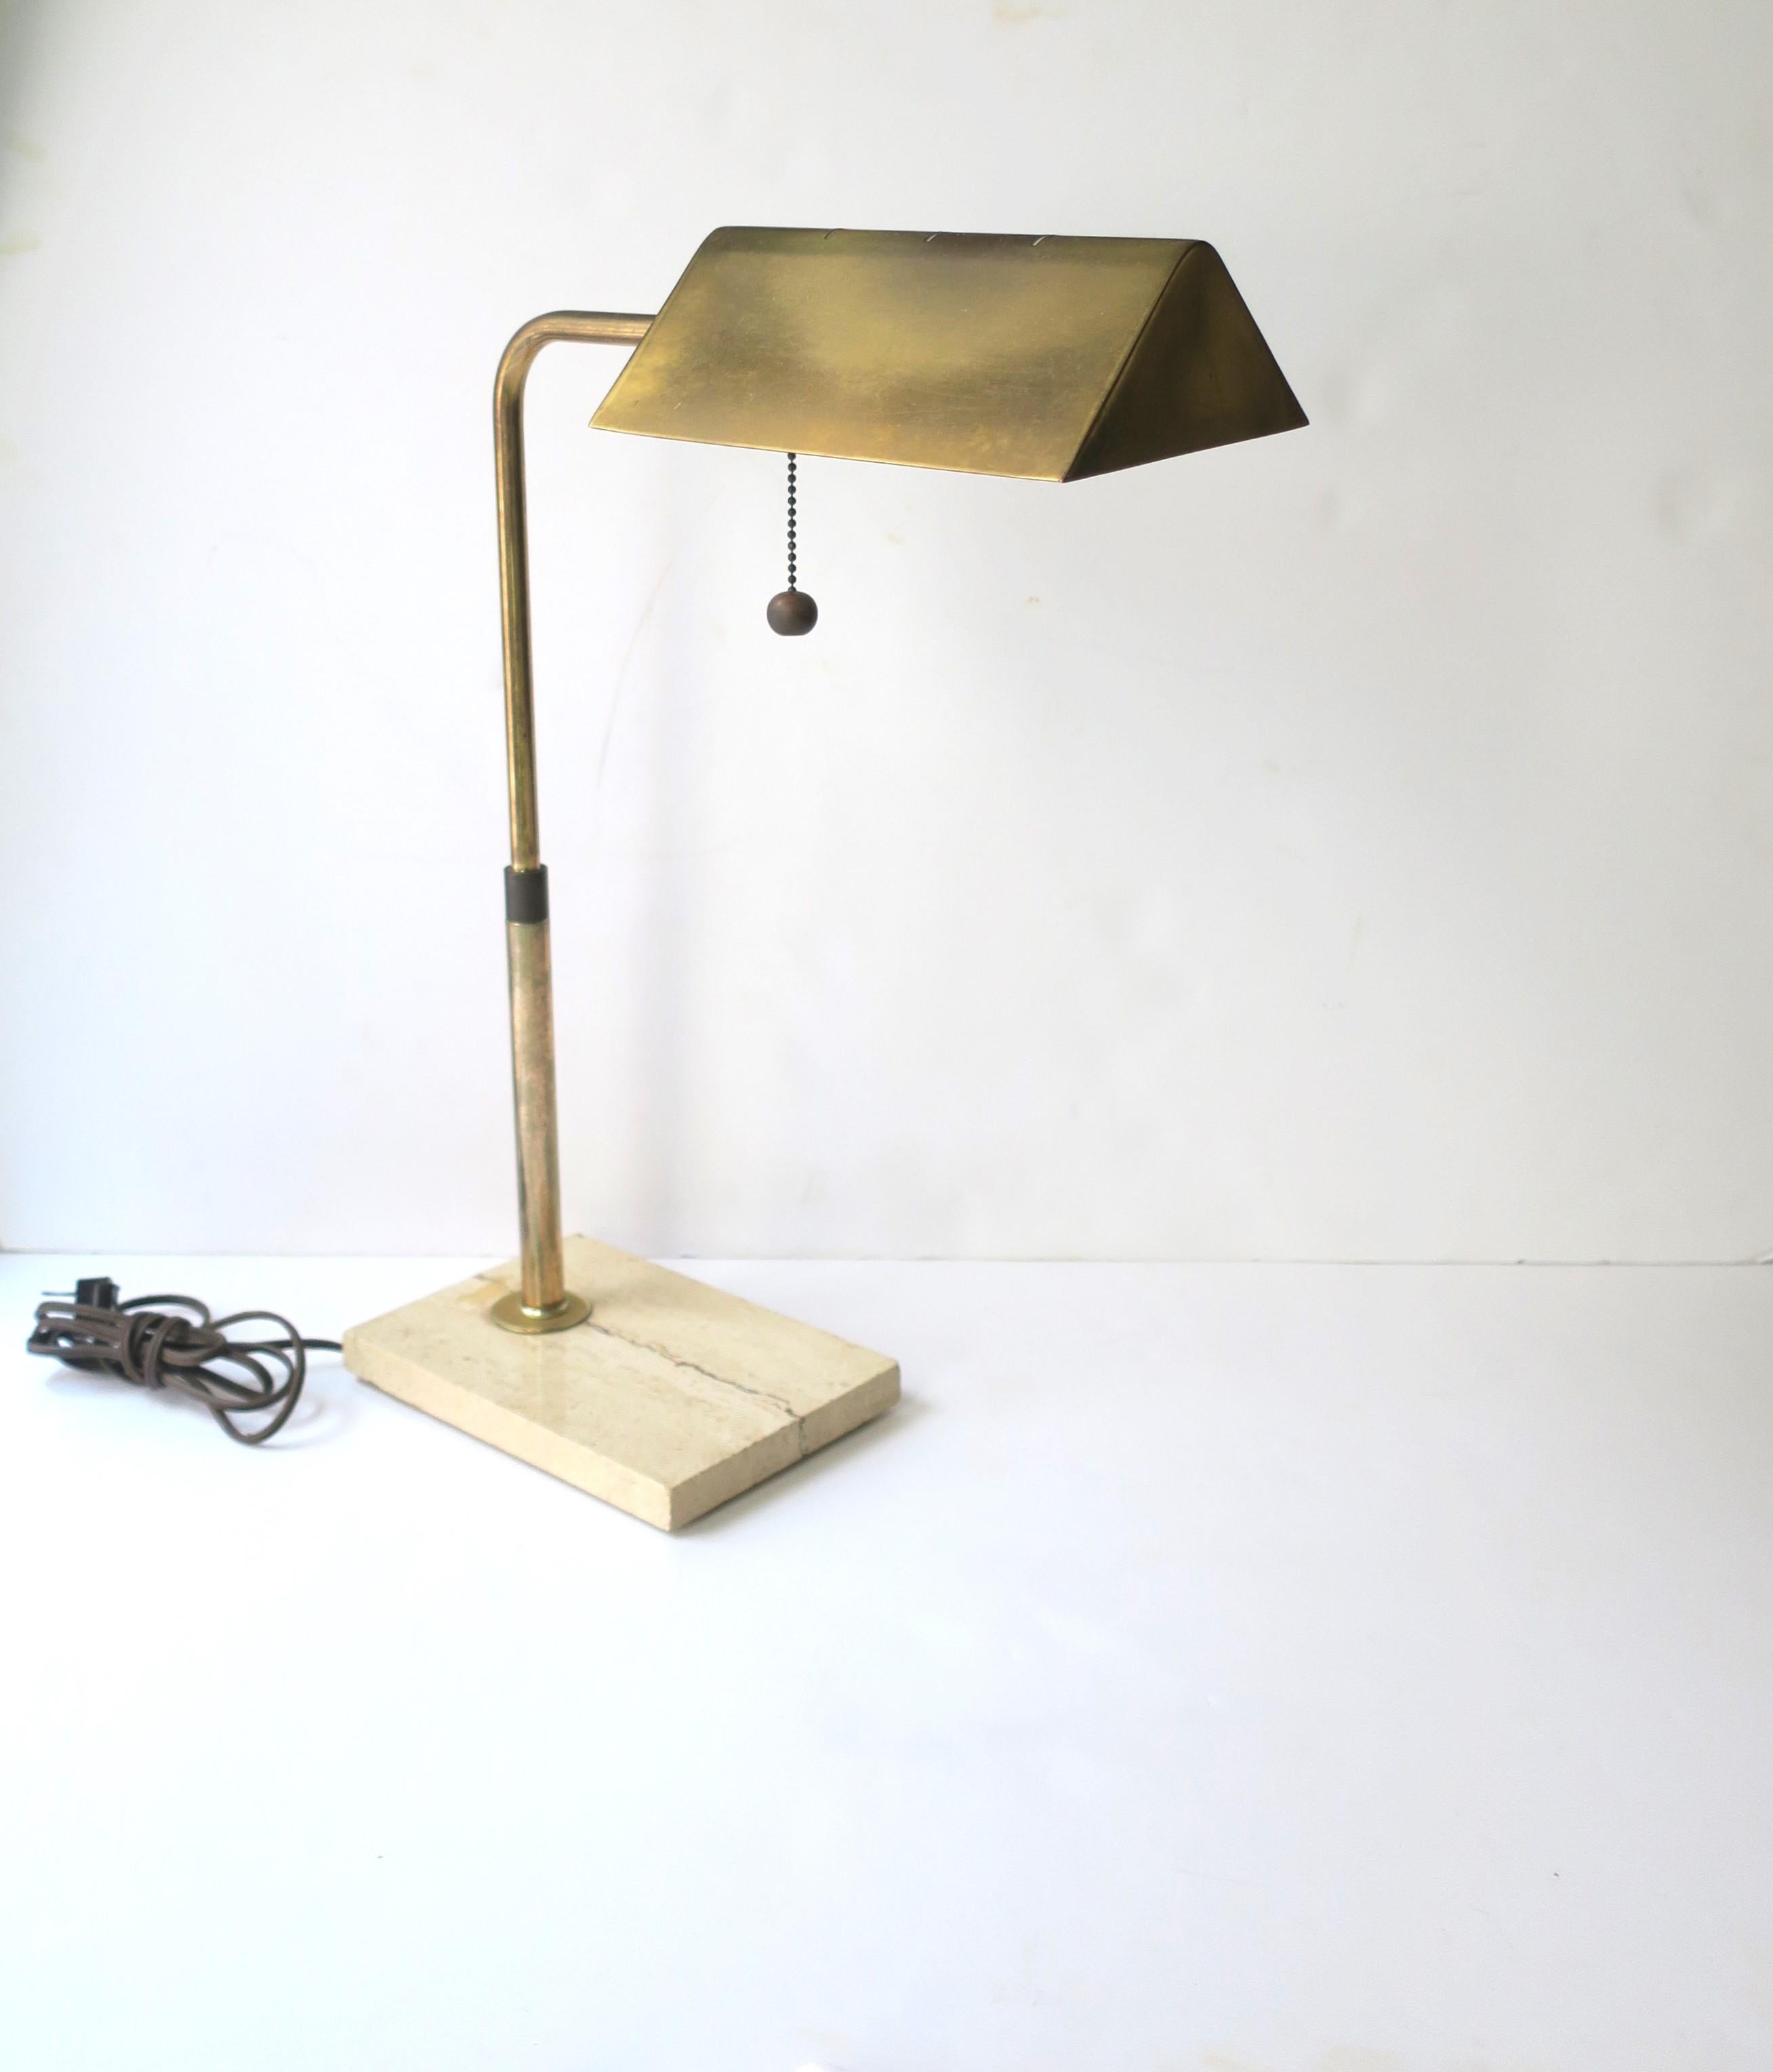 Italian Brass and Travertine Marble Desk or Table Lamp, circa 1960s 1970s For Sale 3